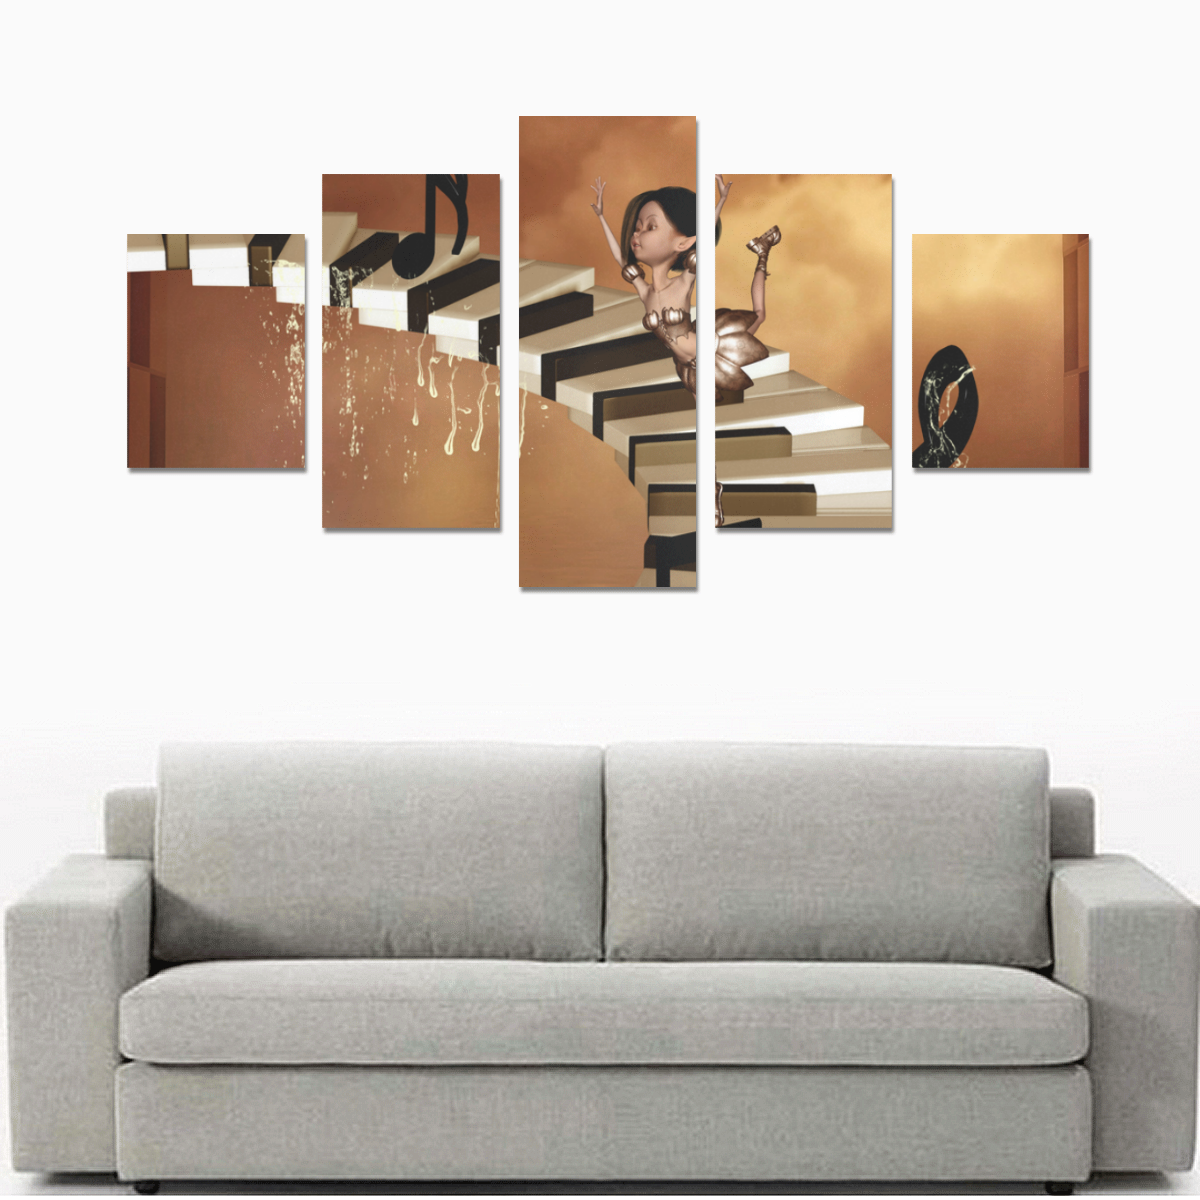 Little fairy dancing on the piano Canvas Print Sets B (No Frame)